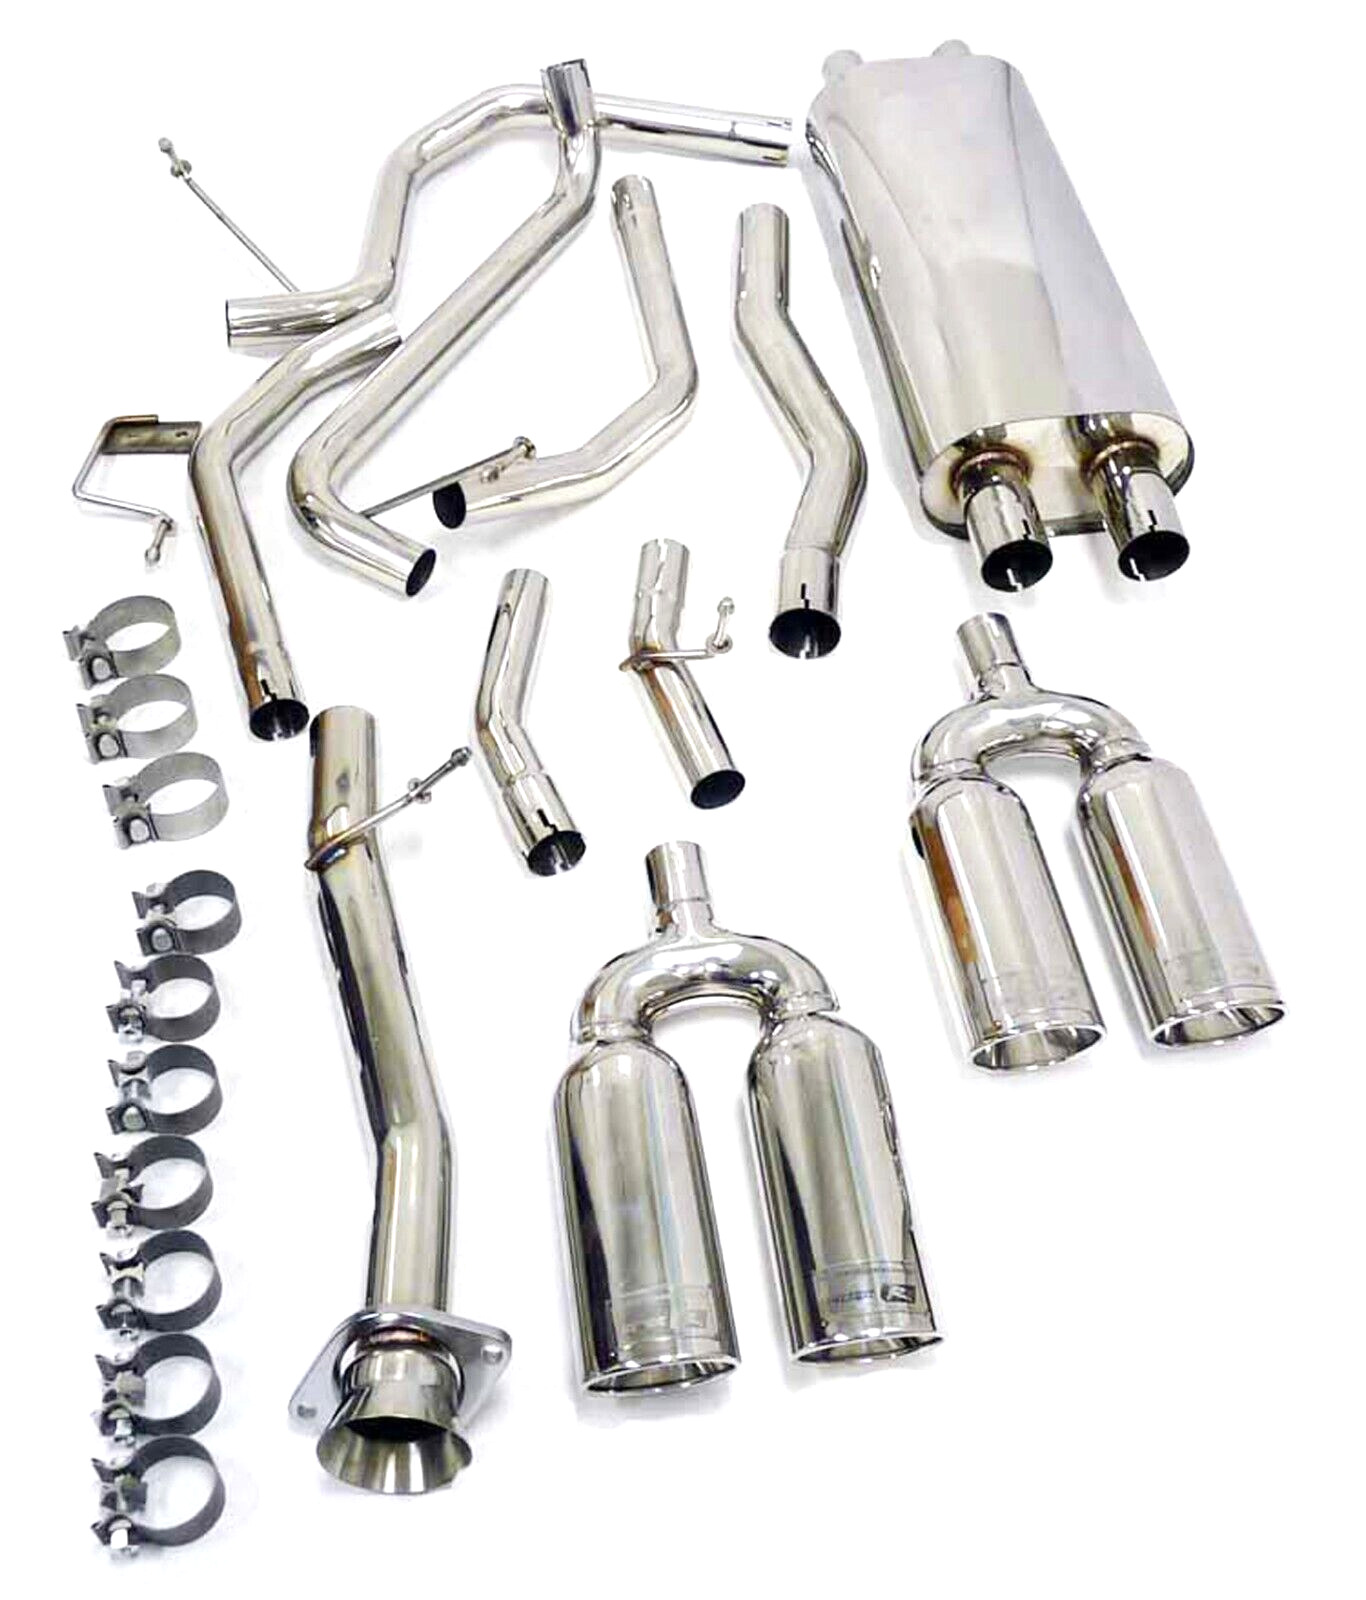 S/S Catback Exhaust System For 03-06 Hummer H2 SUV/SUT By Maximizer-HP 